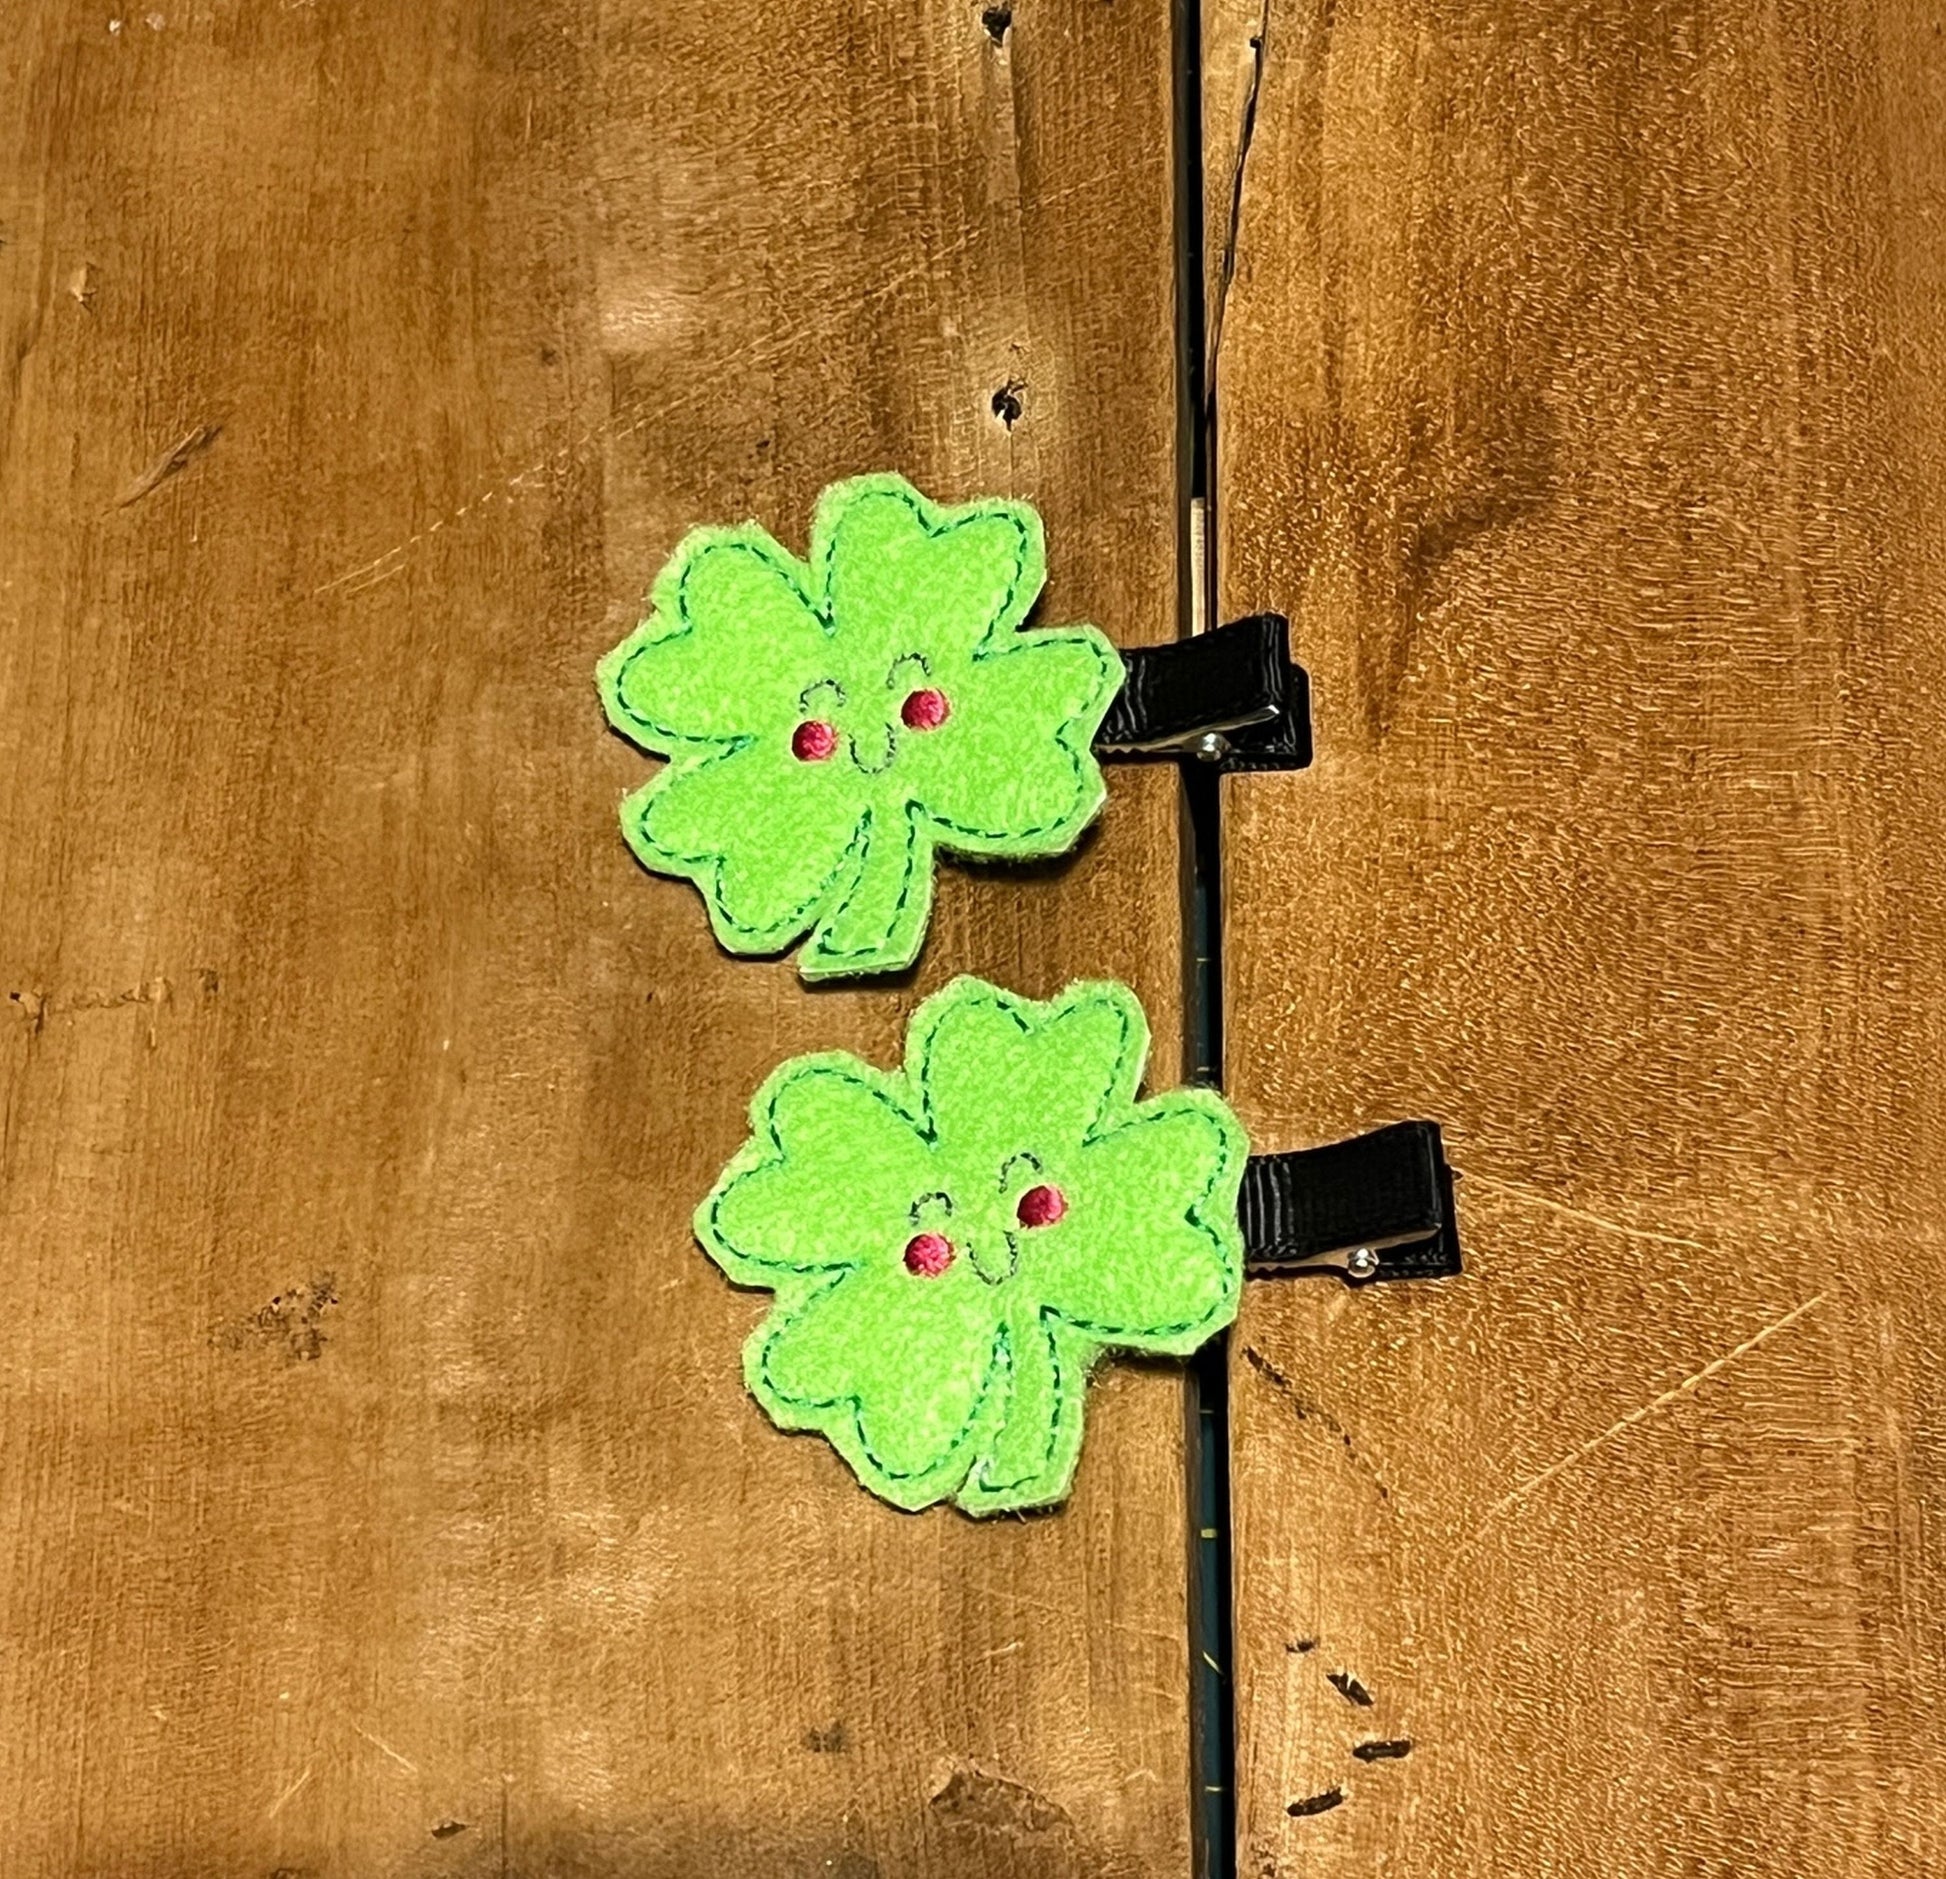 optional set of 2 shamrock hair clips. They can be made for pigtail clips.